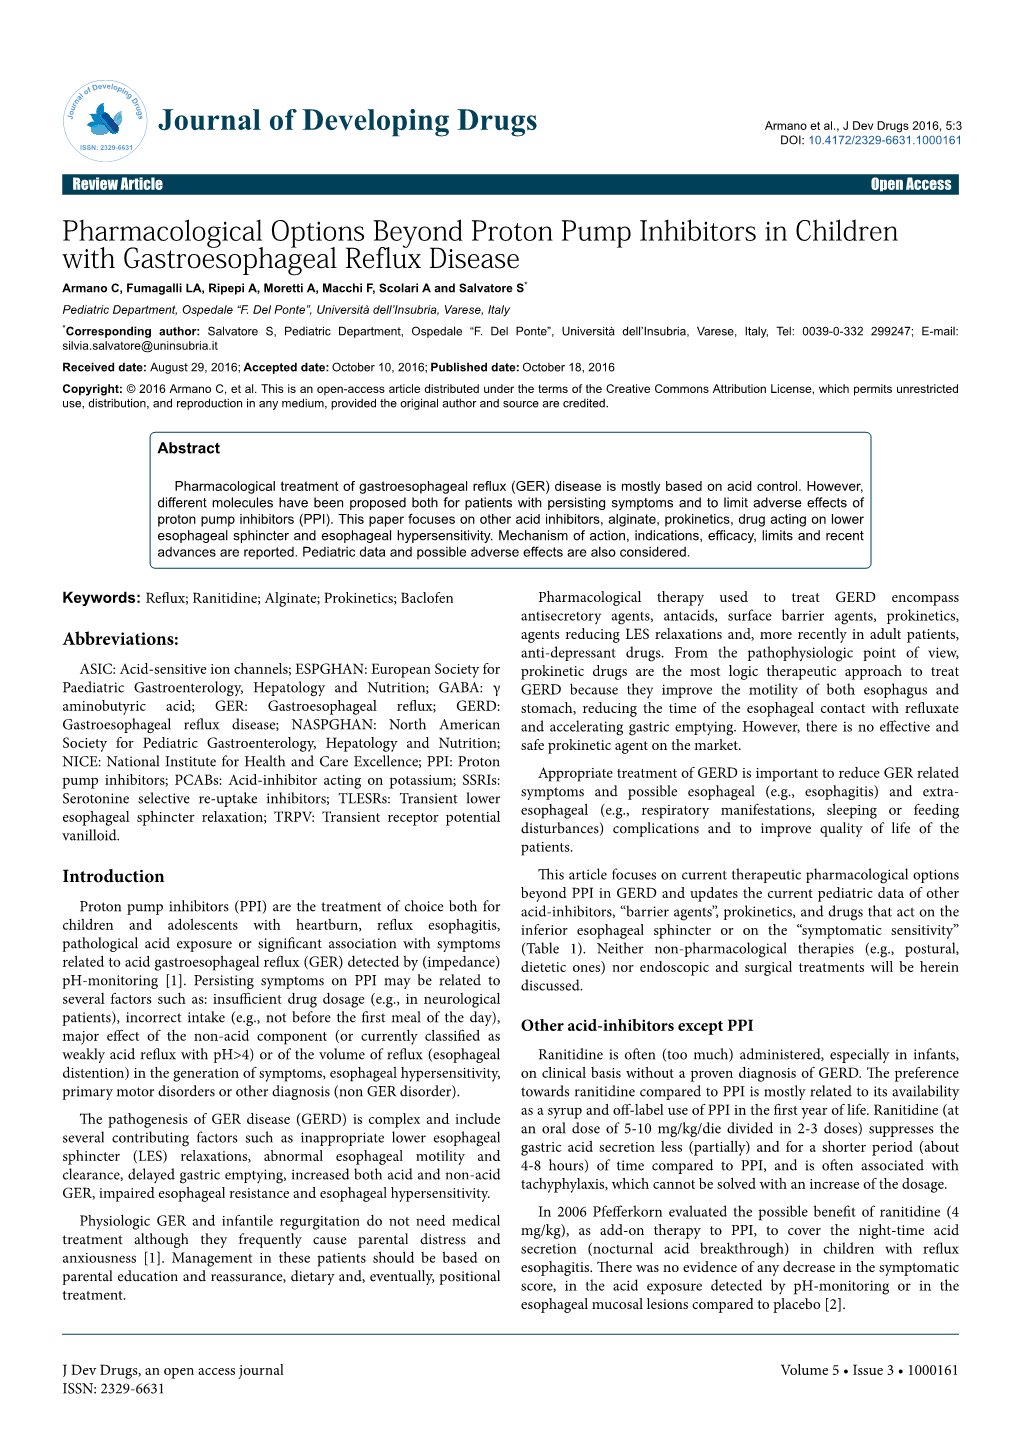 Pharmacological Options Beyond Proton Pump Inhibitors in Children